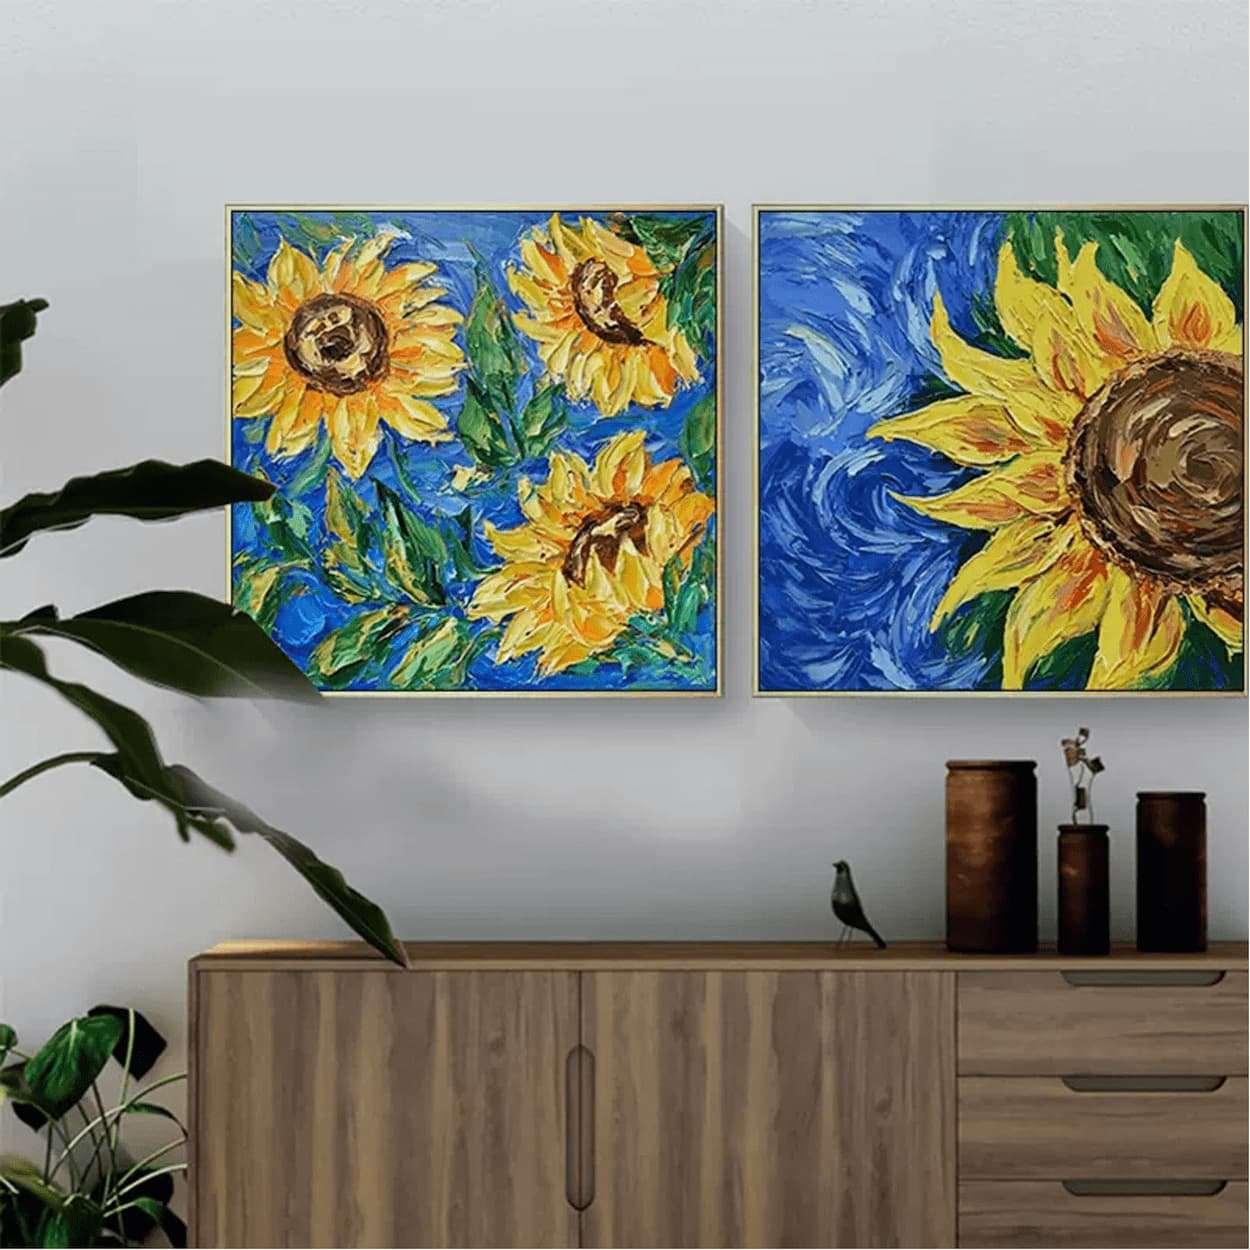 Sunflowers on Canvas - Abstract Art for Home Decor